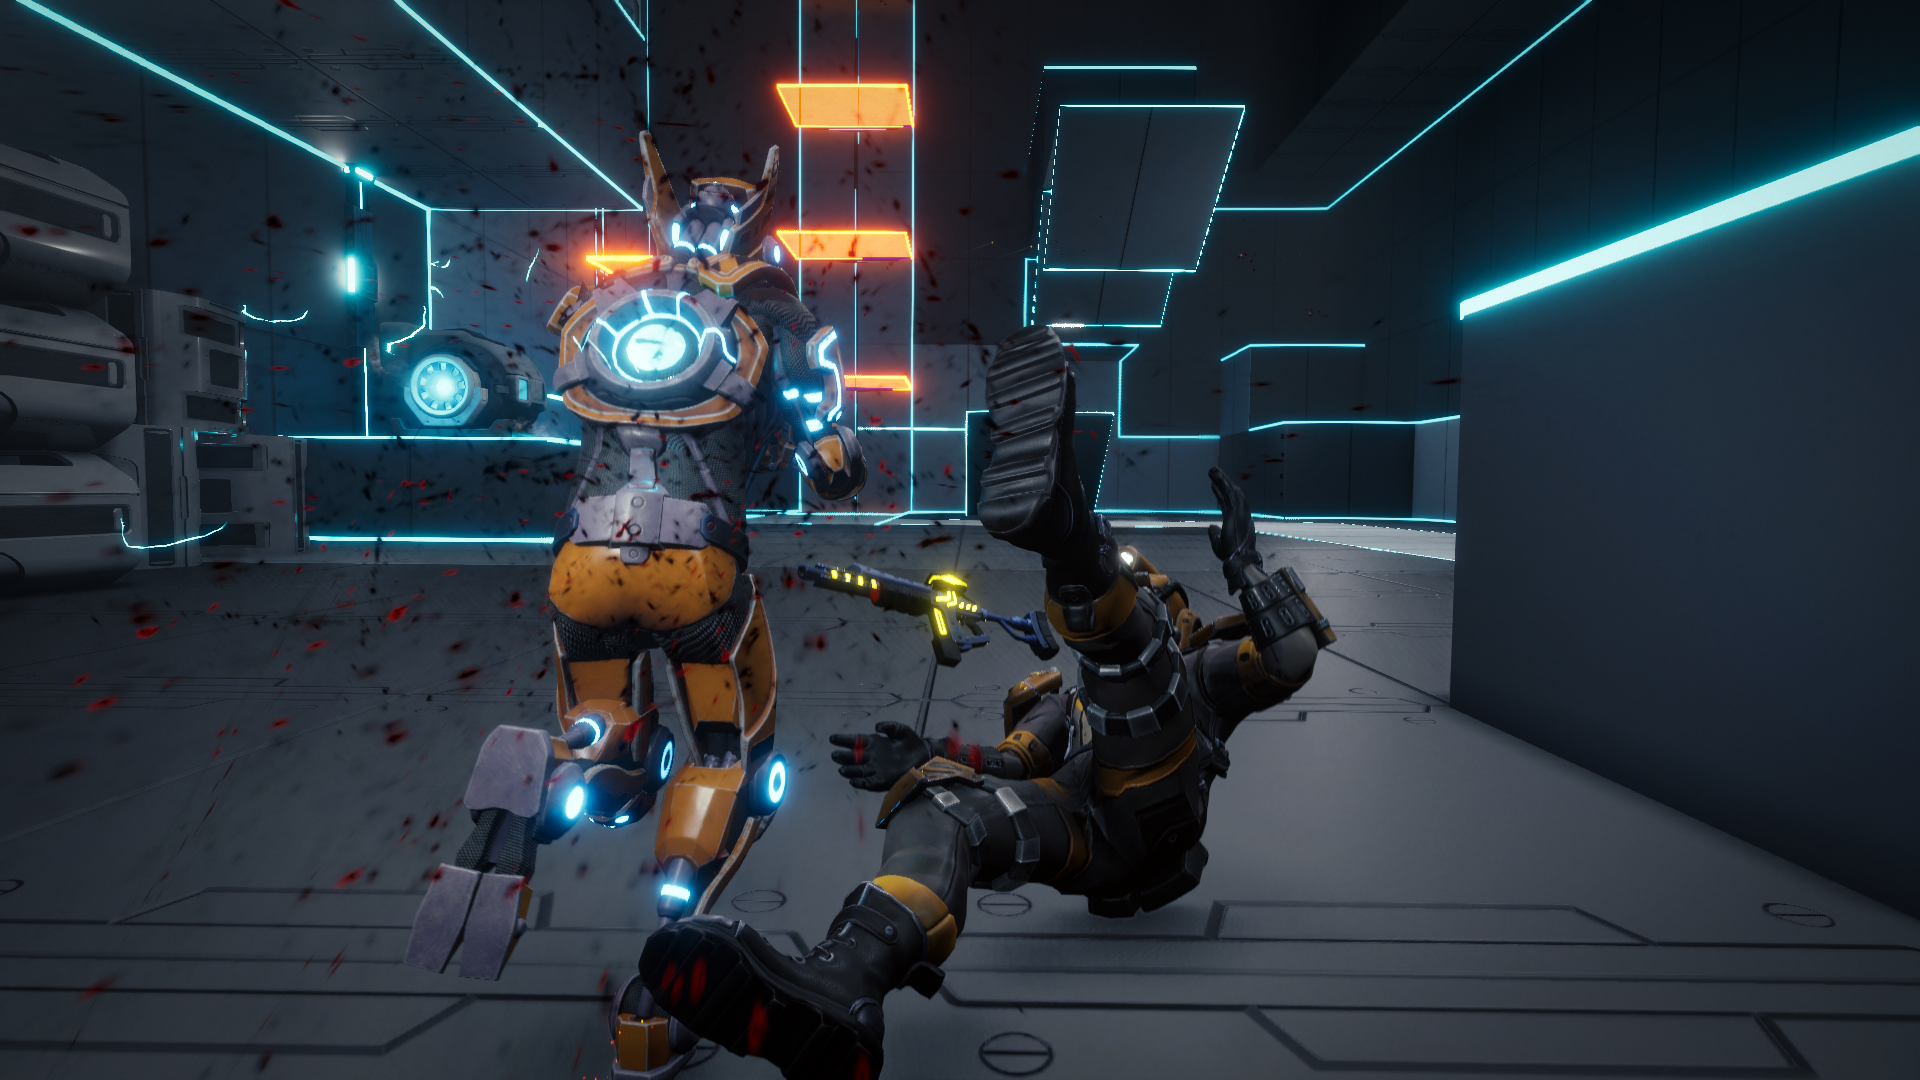 HERO SYNDROME Intense 3rd-person Shooter/Puzzle Hybrid Needs Your Support on Kickstarter